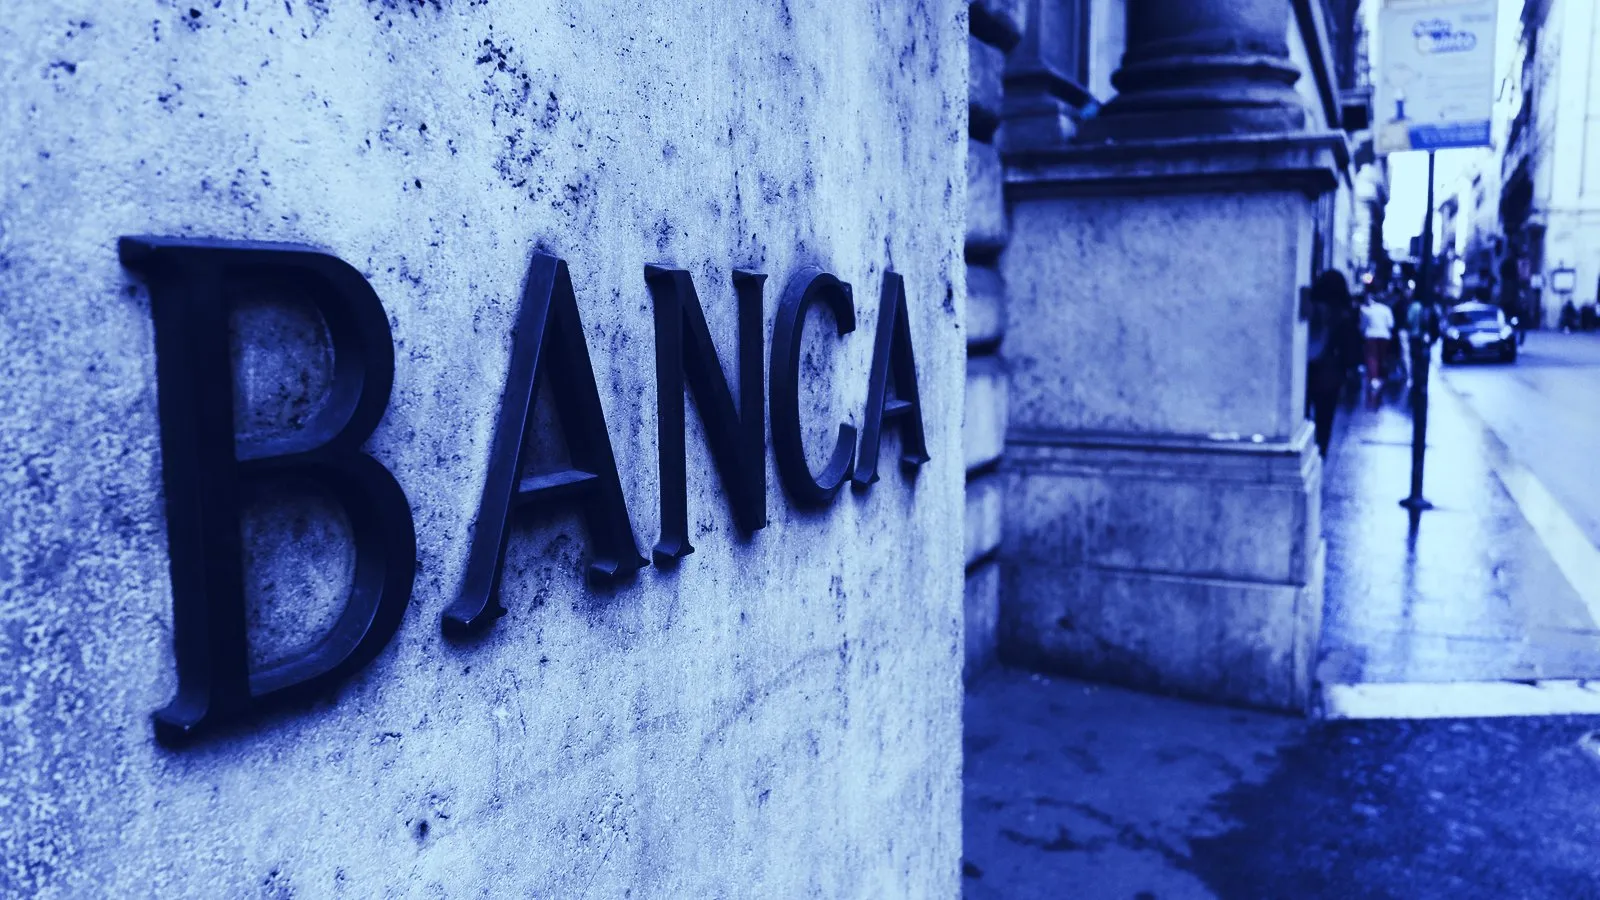 Italian banks are ready to start work on a Europe-wide digital currency. Image: Shutterstock